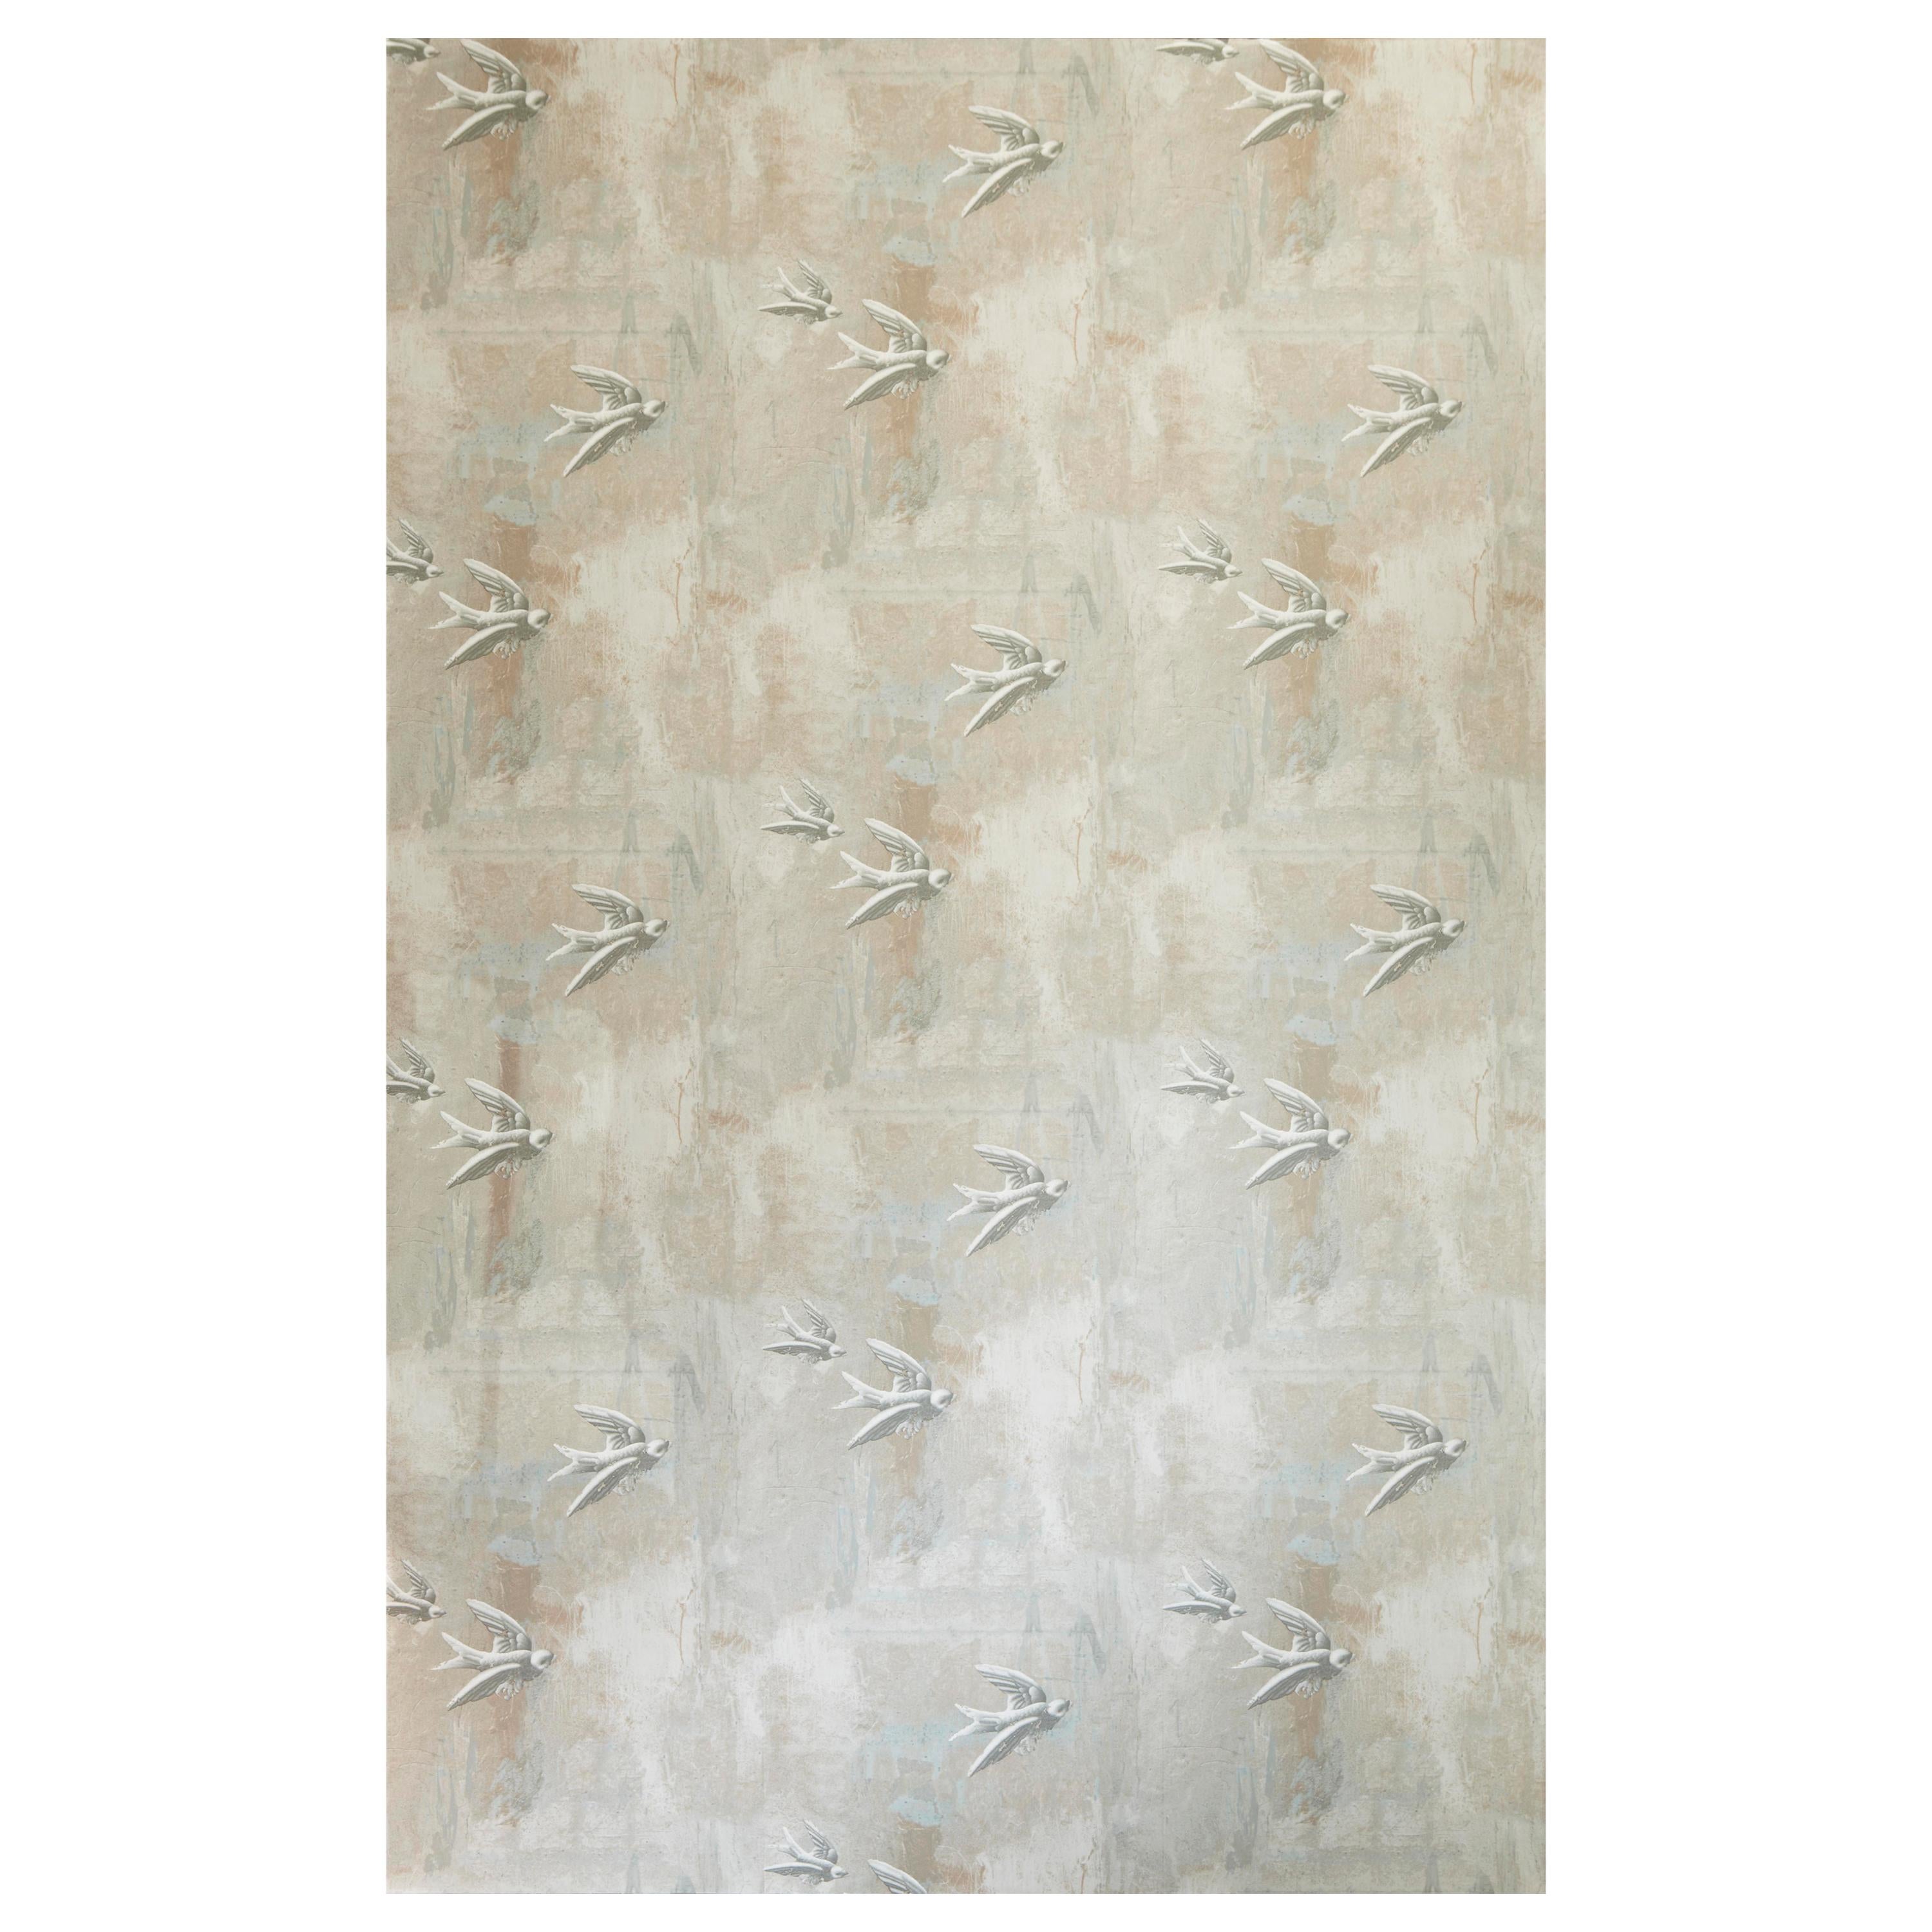 'Fresco Birds' Contemporary, Traditional Wallpaper in Natural For Sale